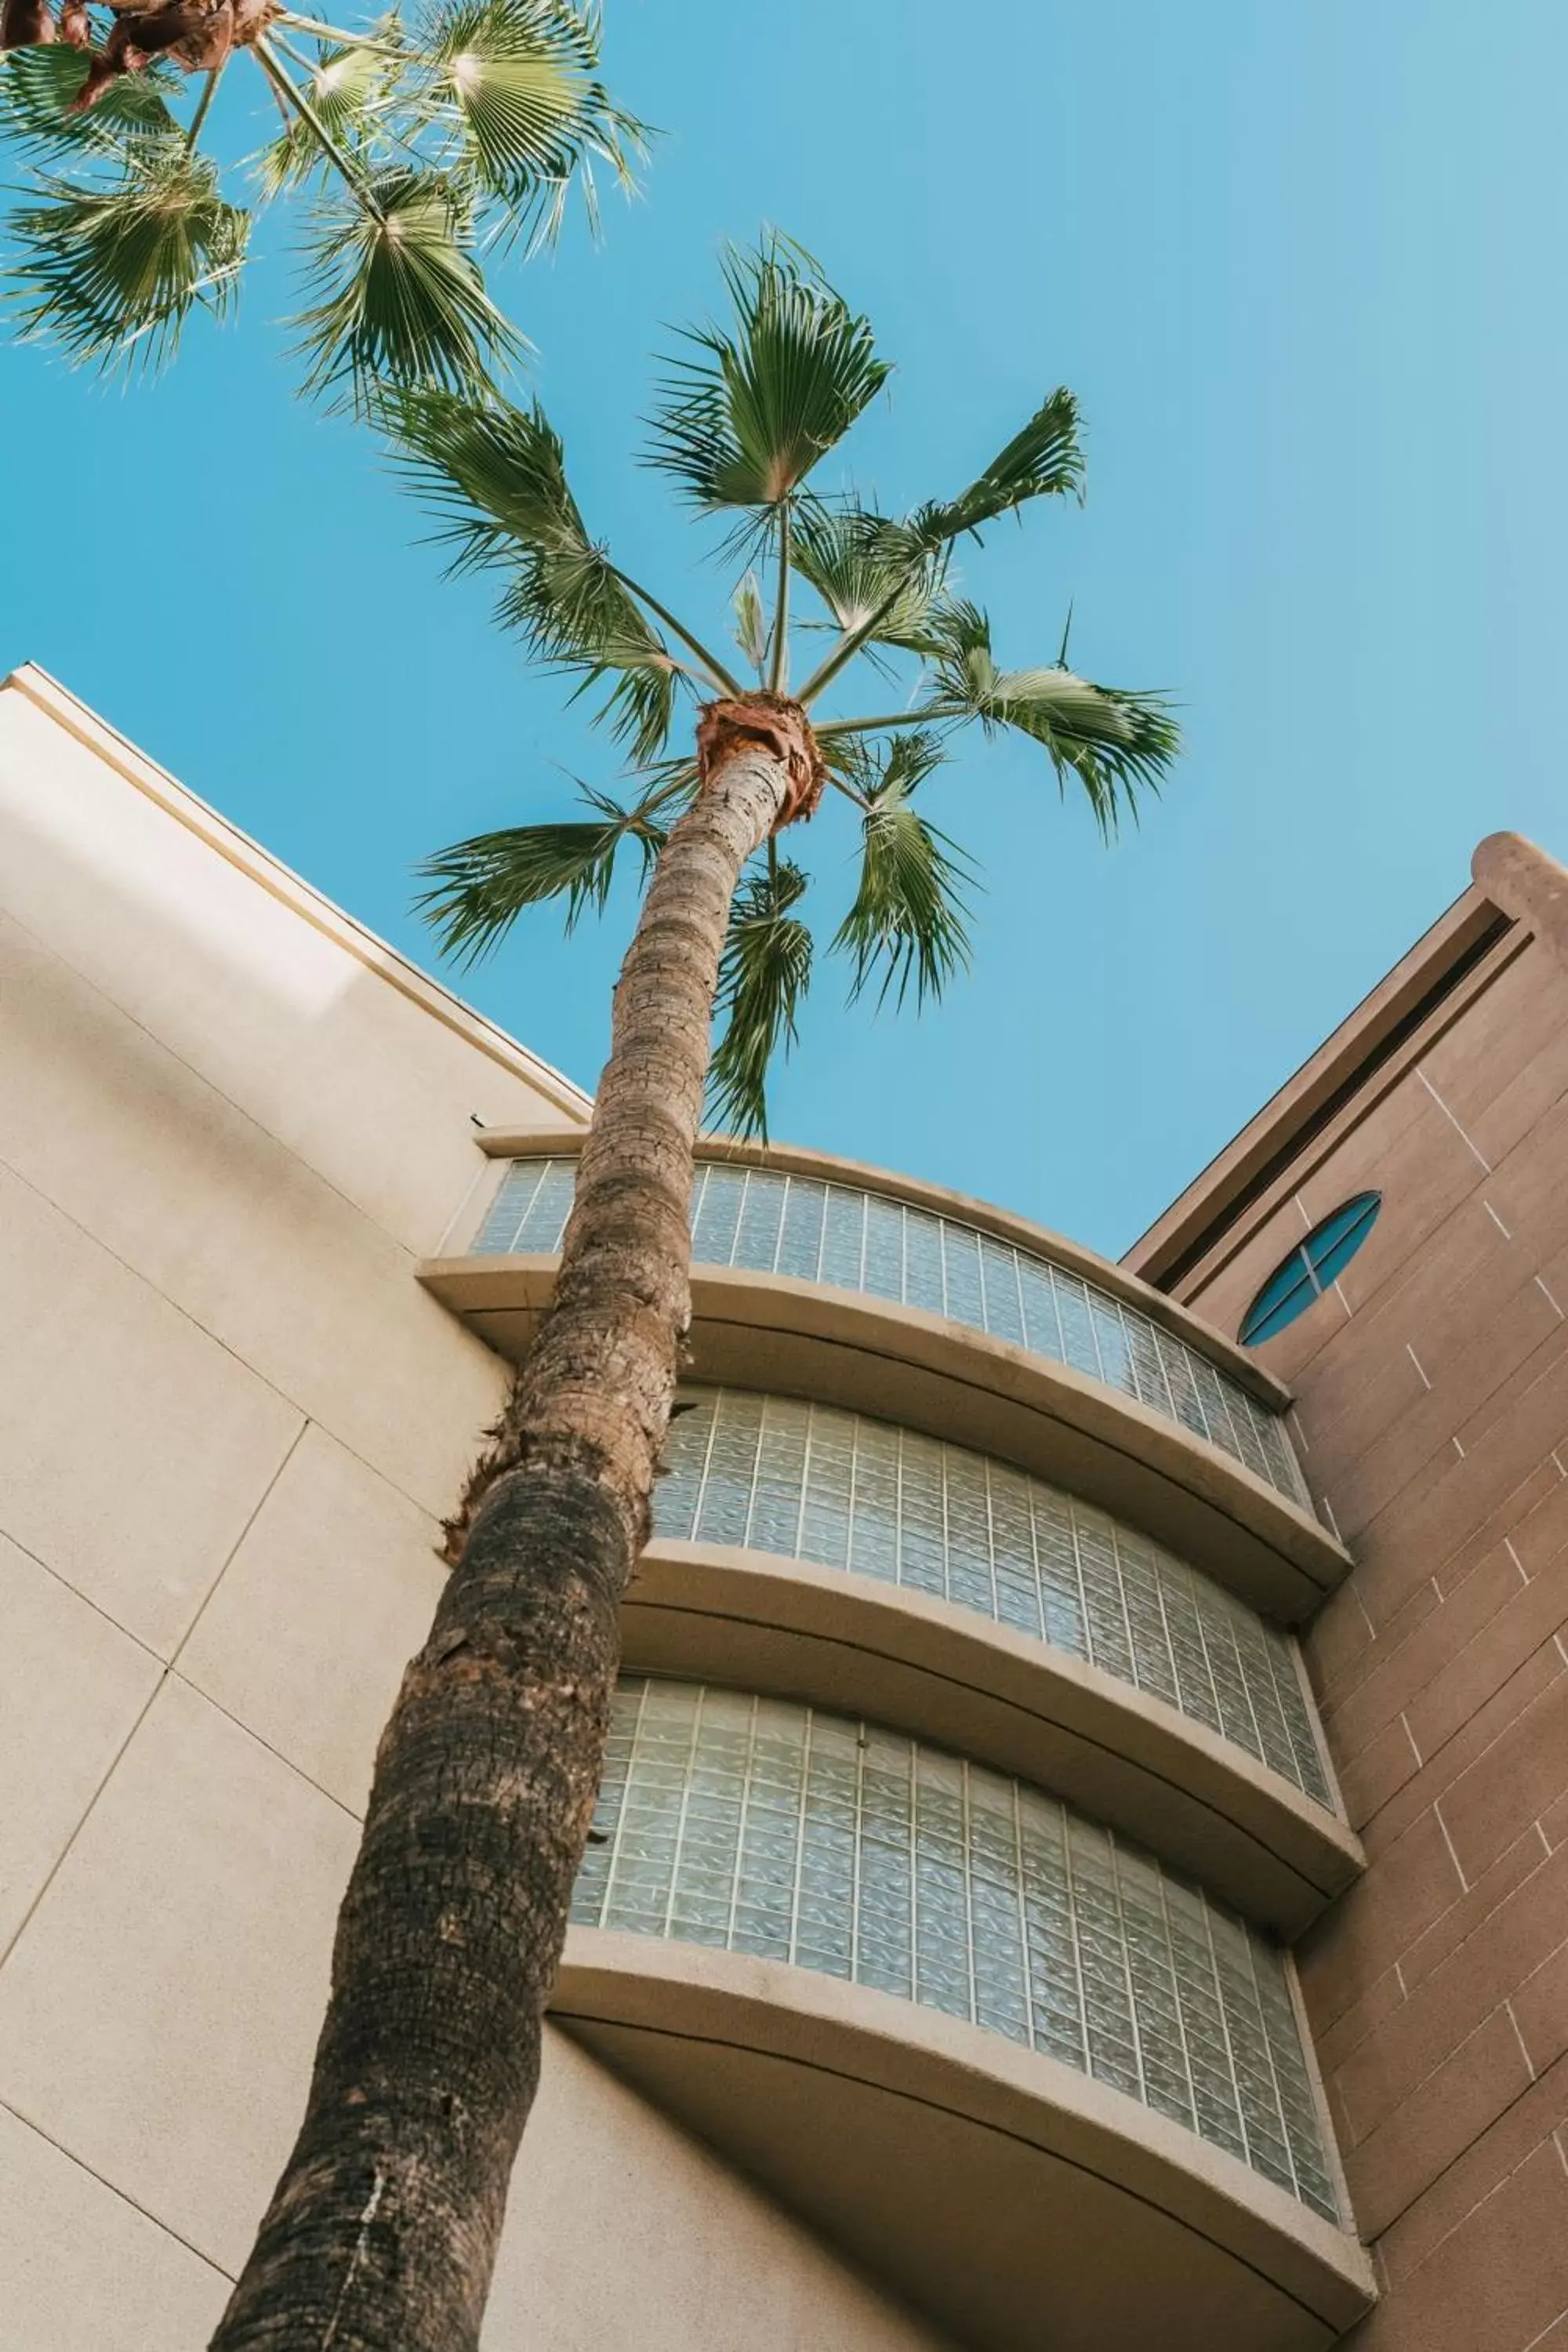 Property Building in Courtyard by Marriott Los Angeles LAX / Century Boulevard